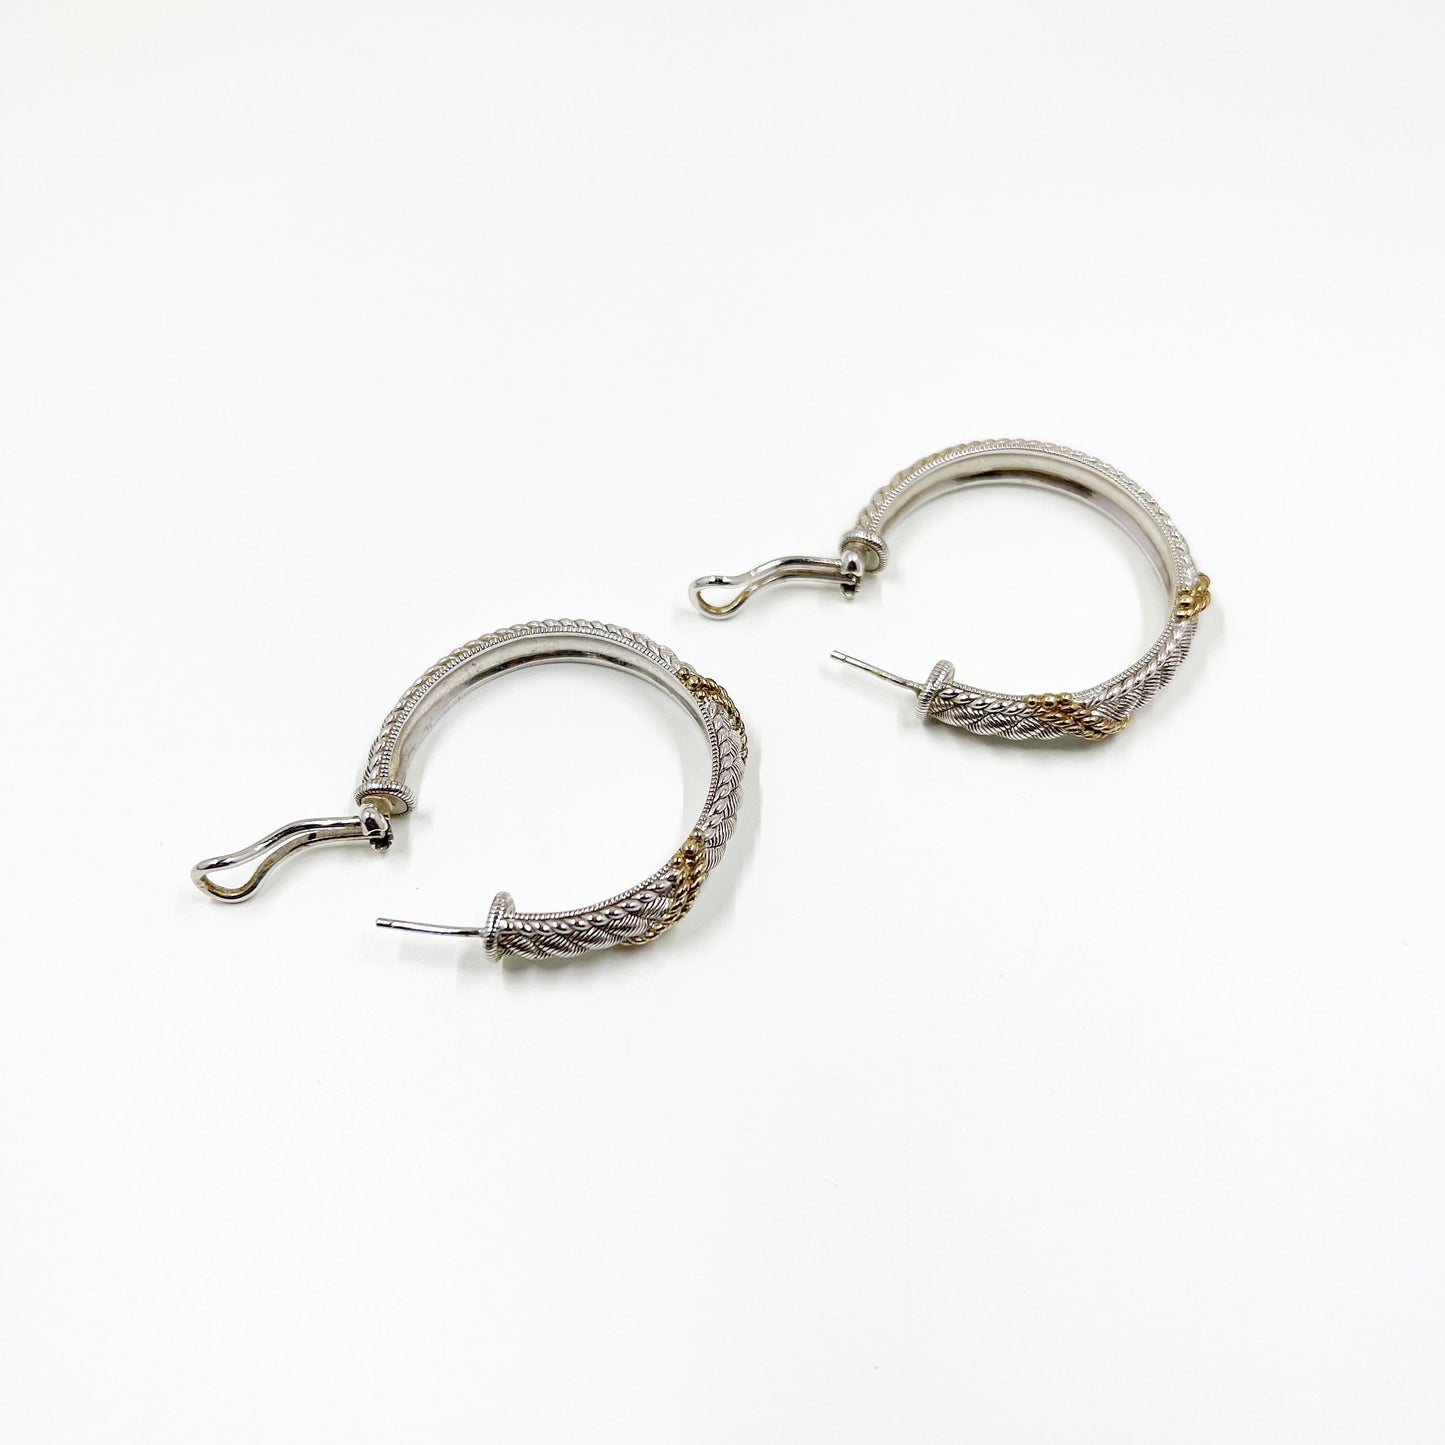 Estate Judith Ripka Two Tone Silver Braided Rope Hoop Earrings| Judith Ripka Silver and Gold Omega Hoop Earrings | Large Hoop Earrings